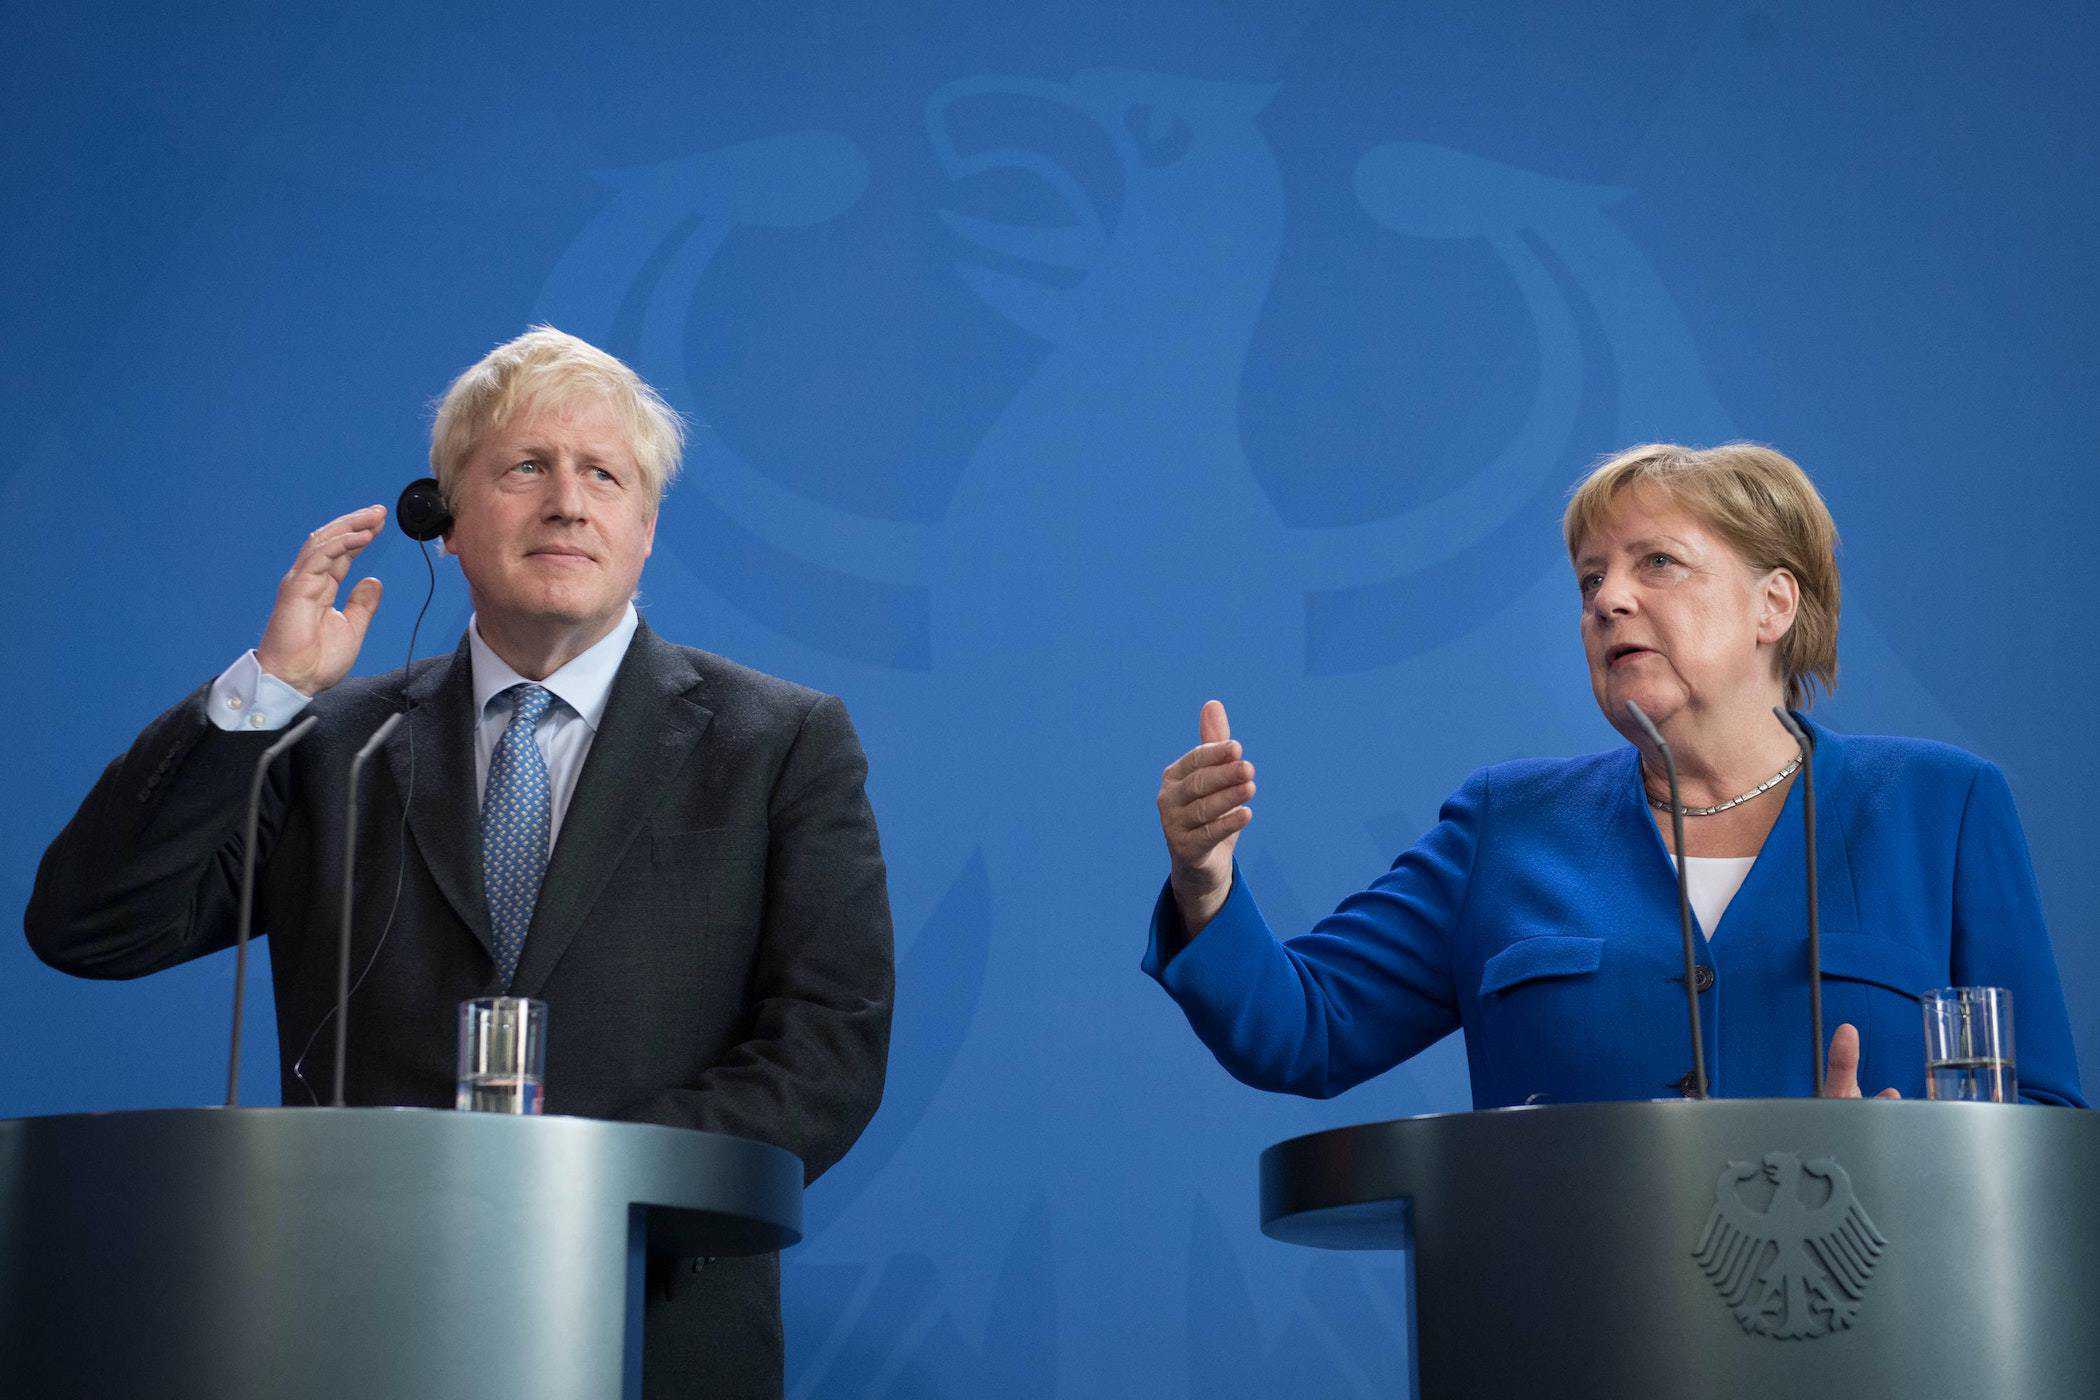 Covid19: Germany acted with foresight while UK continues to act with shambolic hindsight